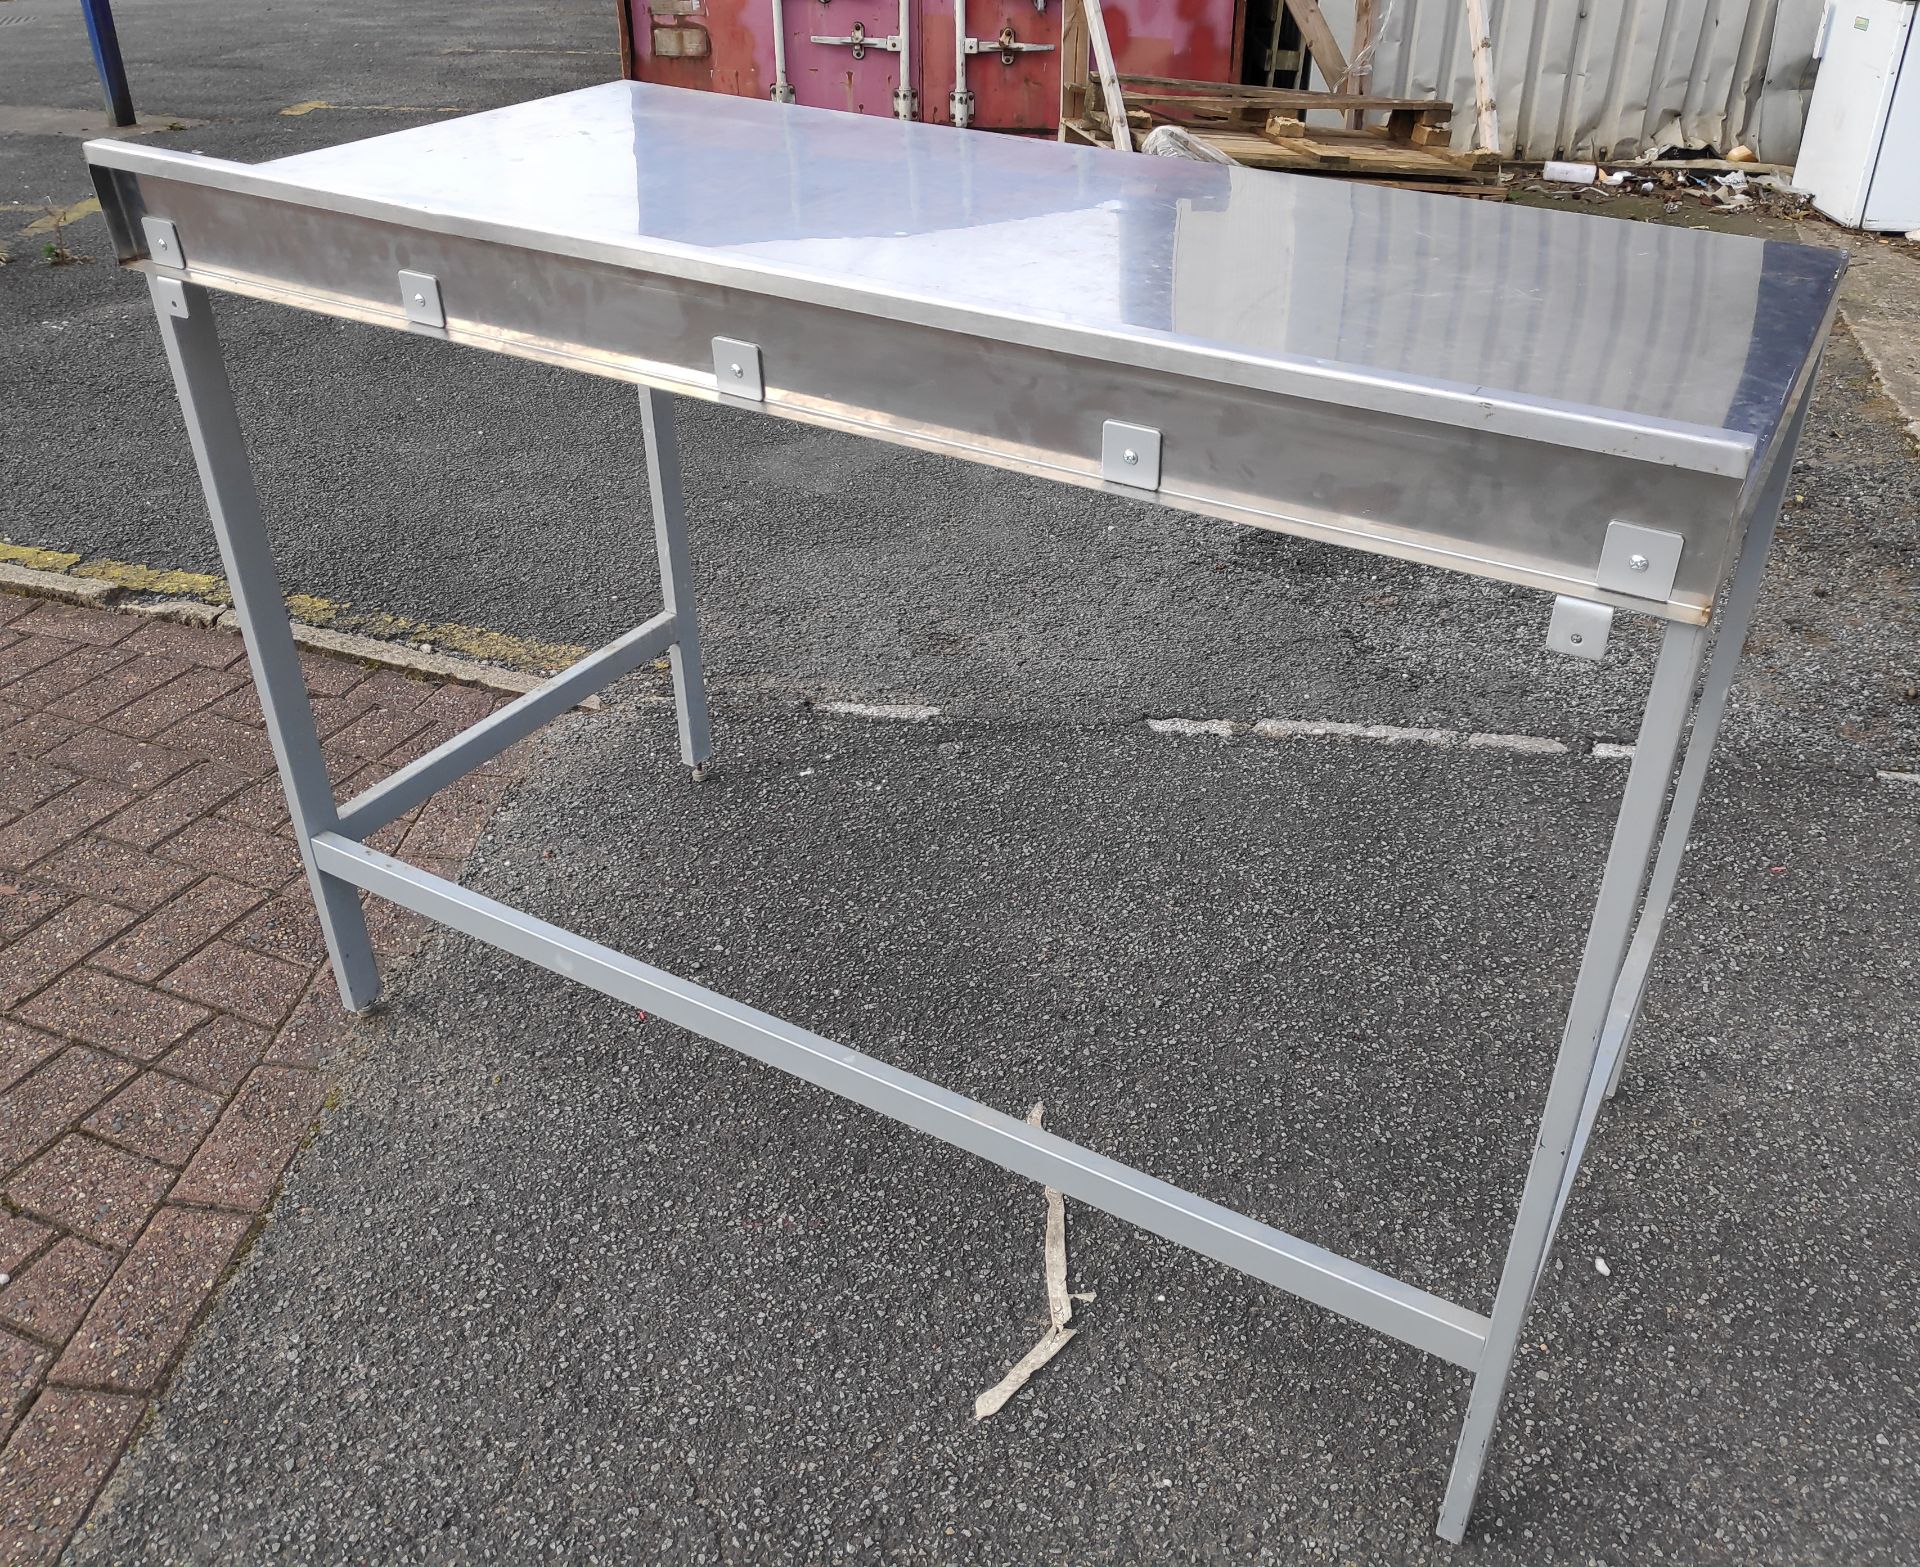 1 x Stainless Steel Prep Bench with Upstand - 126cm (L) x 64.5cm (D) x 95cm (H) - JMCS107 - CL723 - - Image 4 of 7